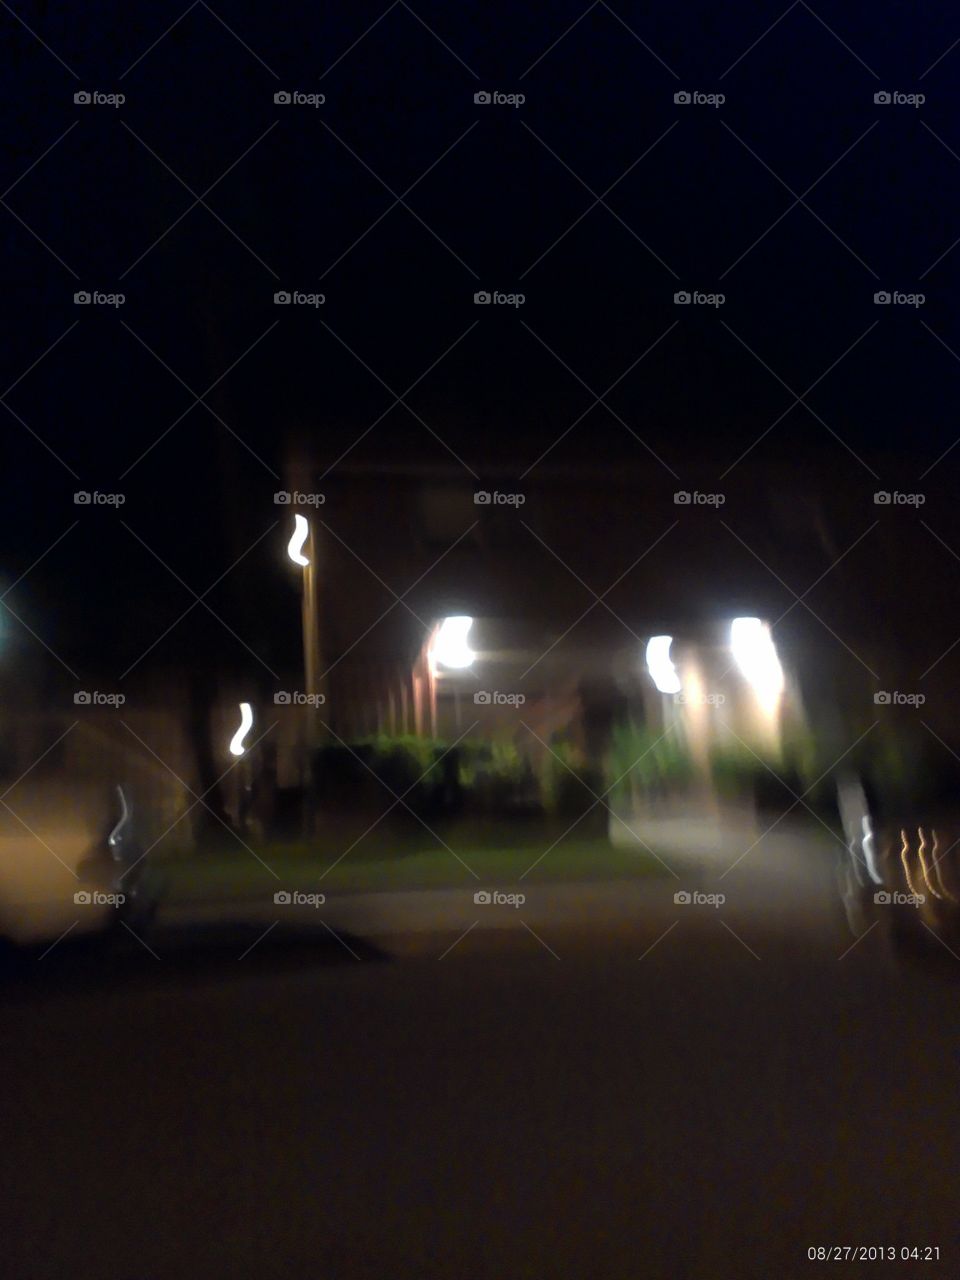 oasis apartments . I was outside taking pictures but I don't know why it came out like this 